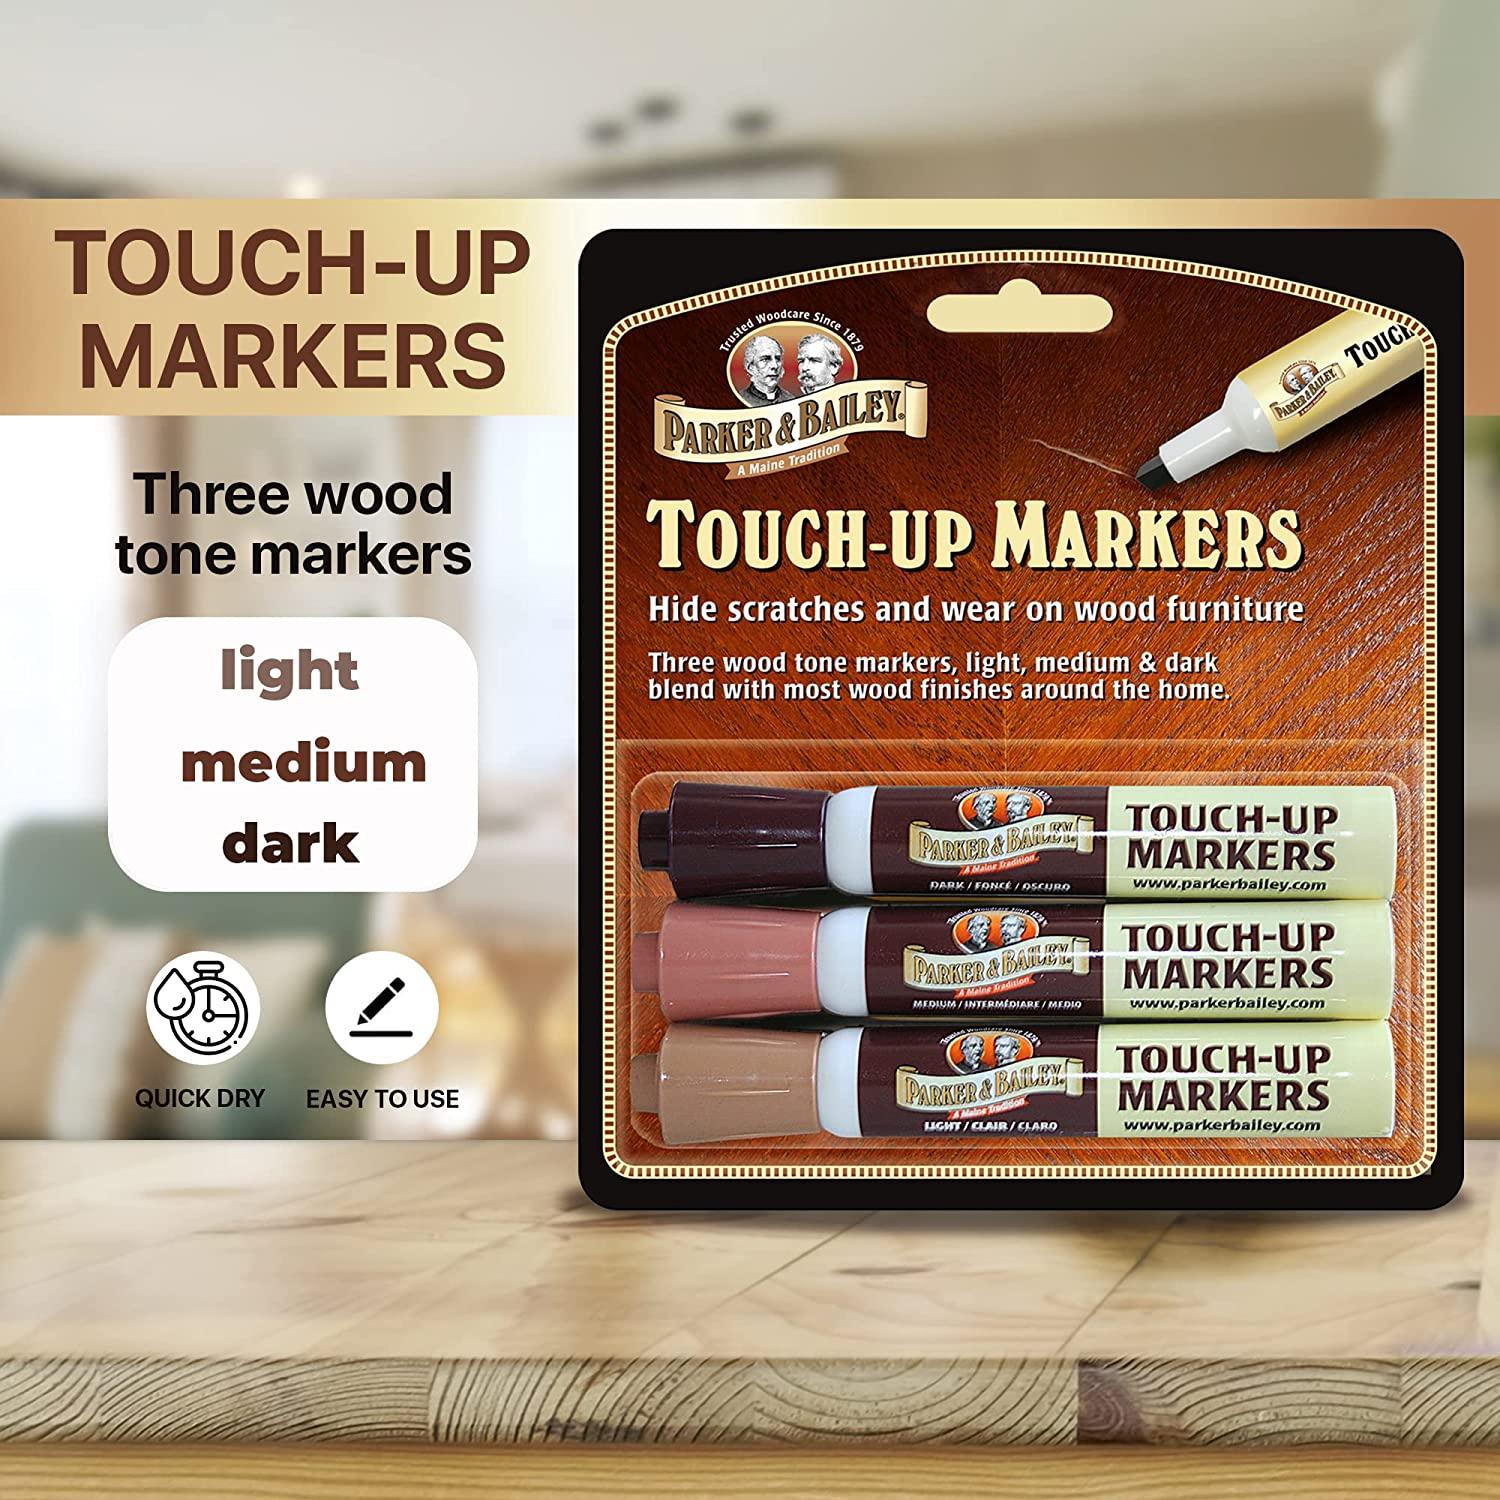 Parker & Bailey Touch-Up Markers - Furniture Markers Touch Up Furniture  Scratch Repair Markers Wood Floor Scratch Remover Wood Marker Wood Stain  Marker for Wood Furniture Wood Pens for Scratches